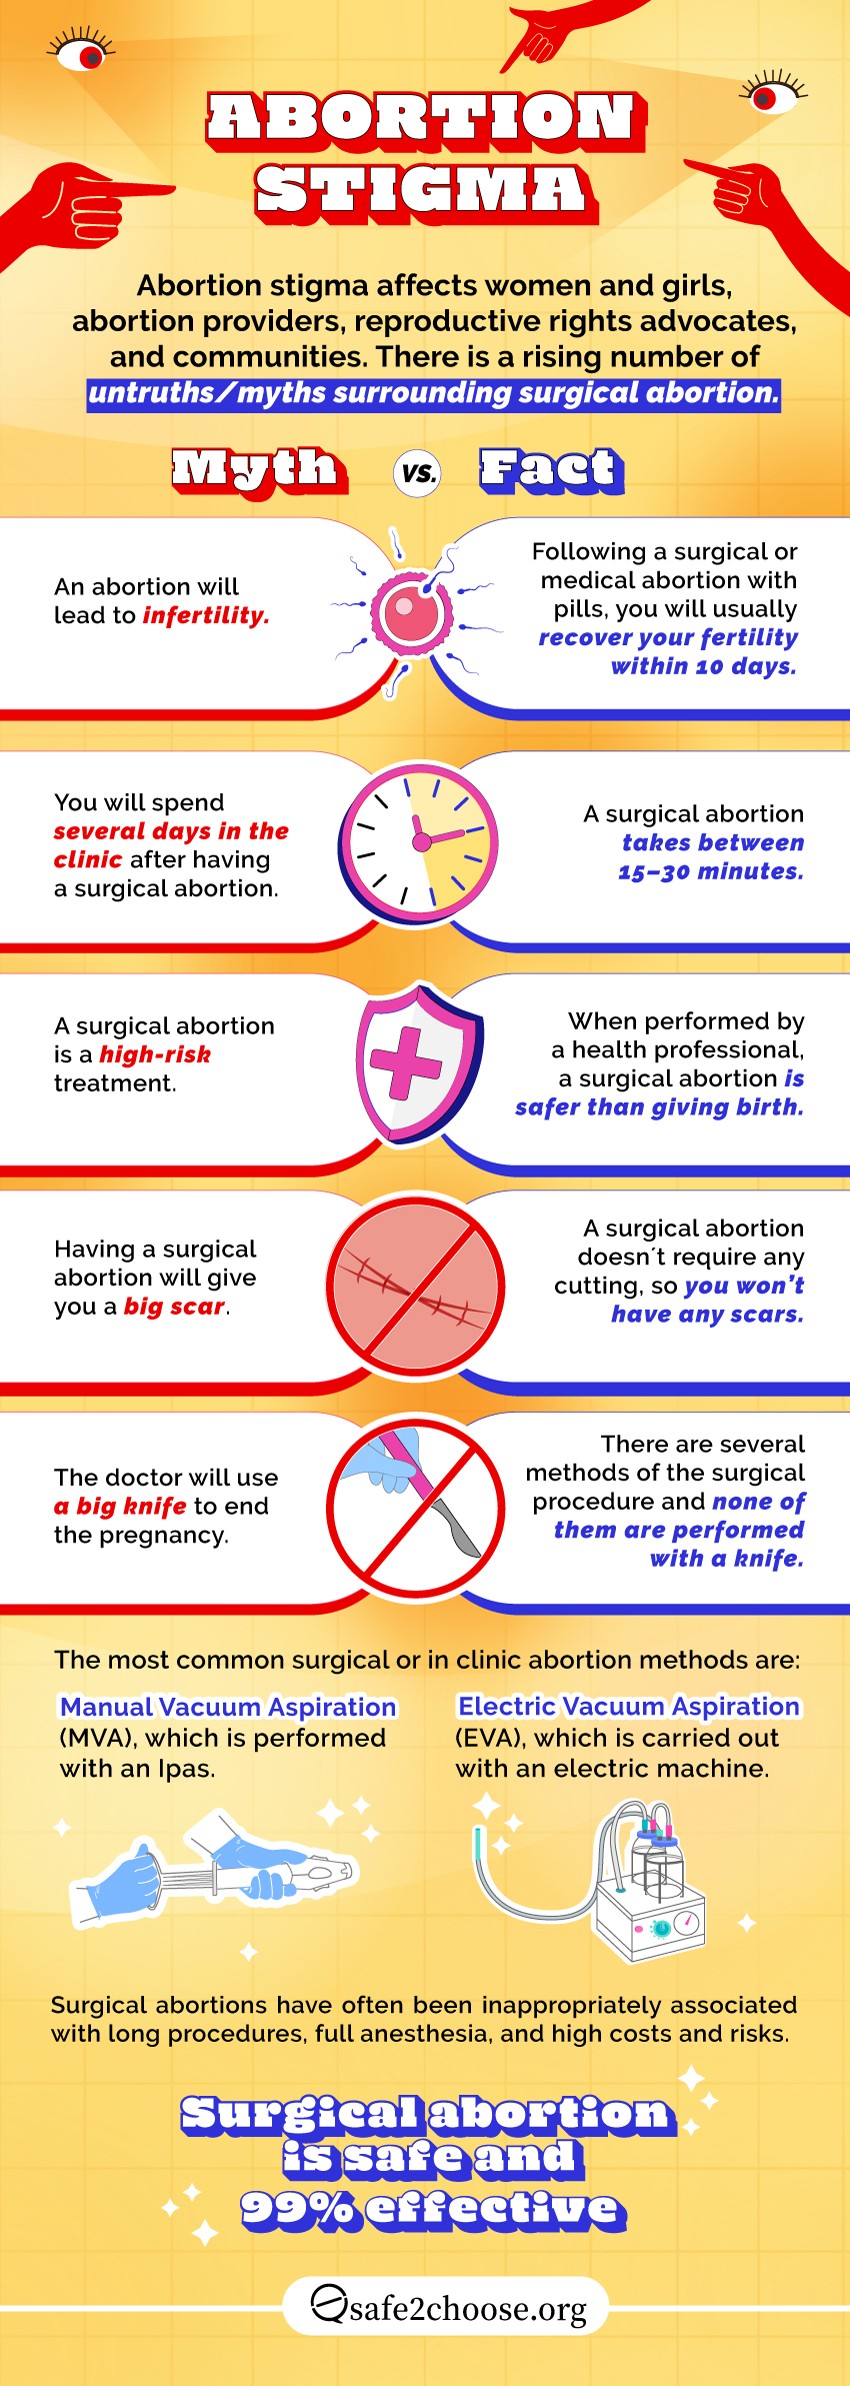 explanation of the abortion stigma and its consequences